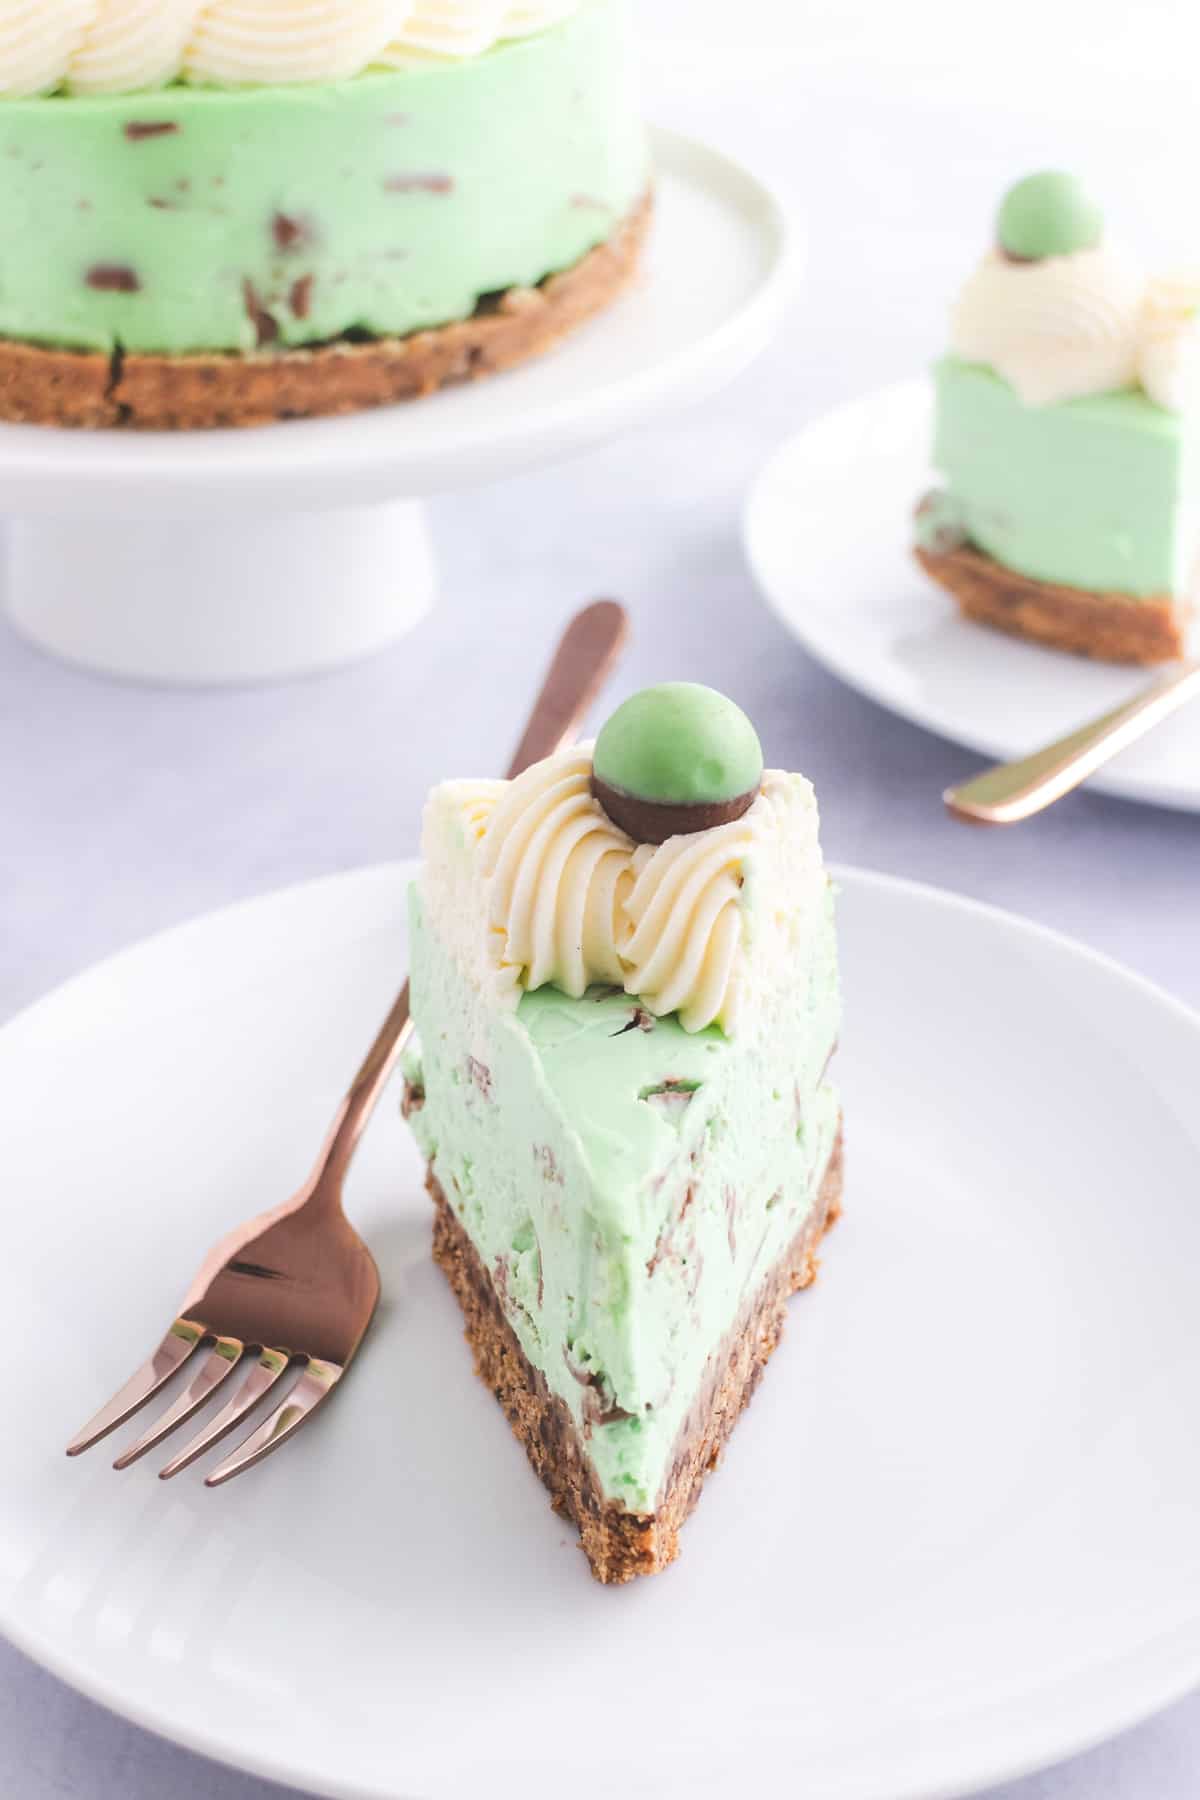 Mint green cheesecake with chunks of chocolate in the filling